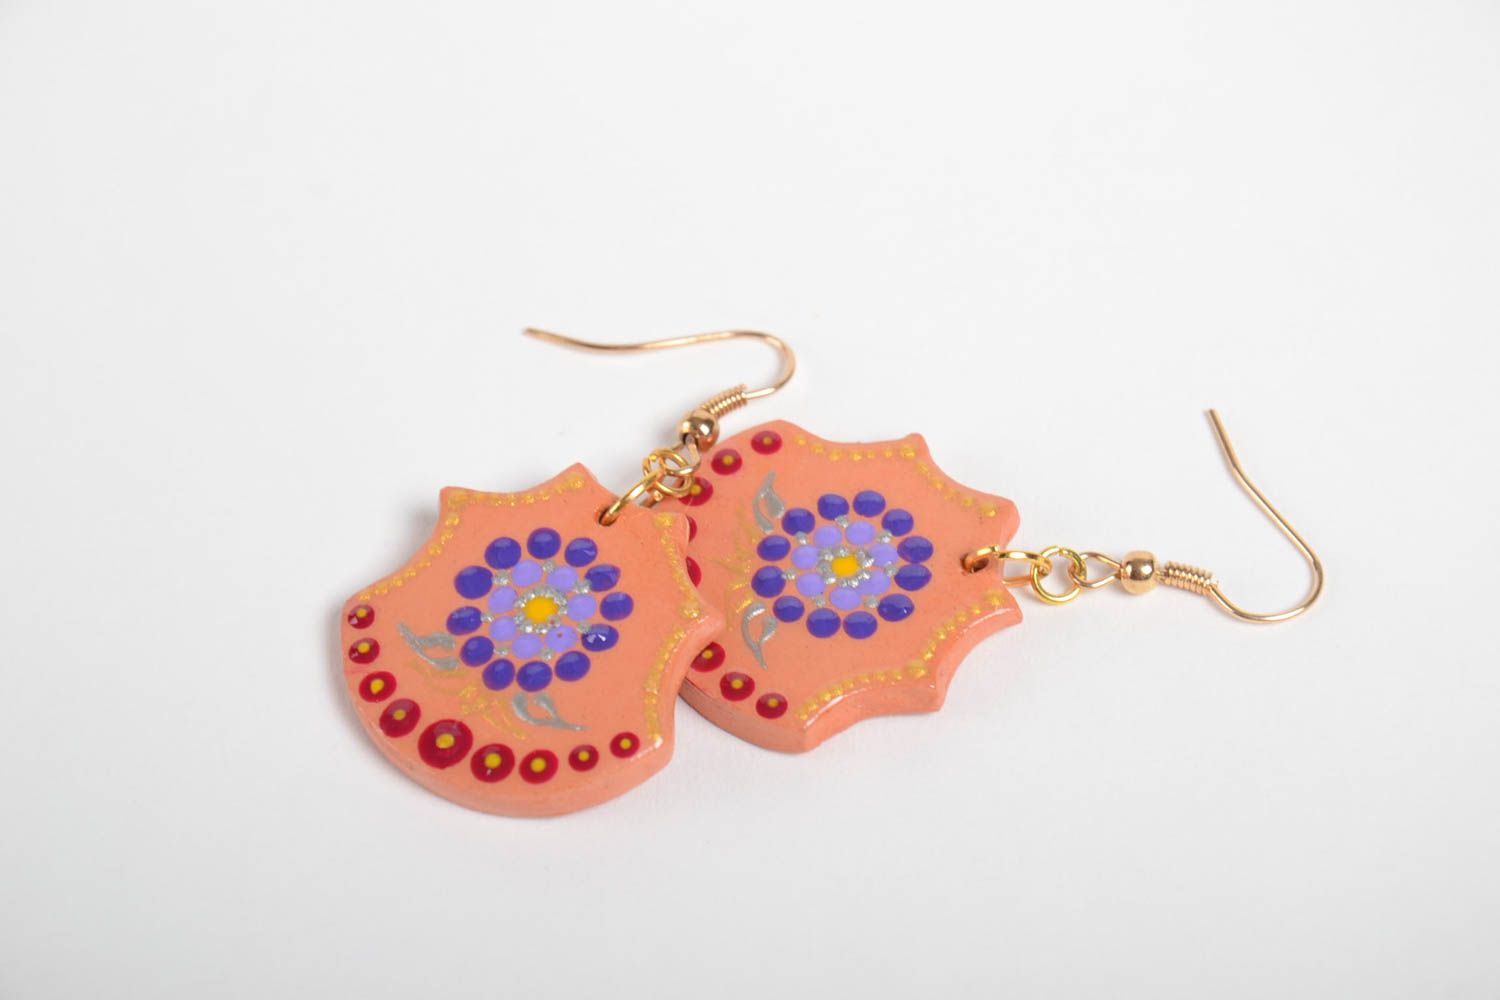 Handmade ceramic earrings clay earrings with painting earrings with charms photo 4